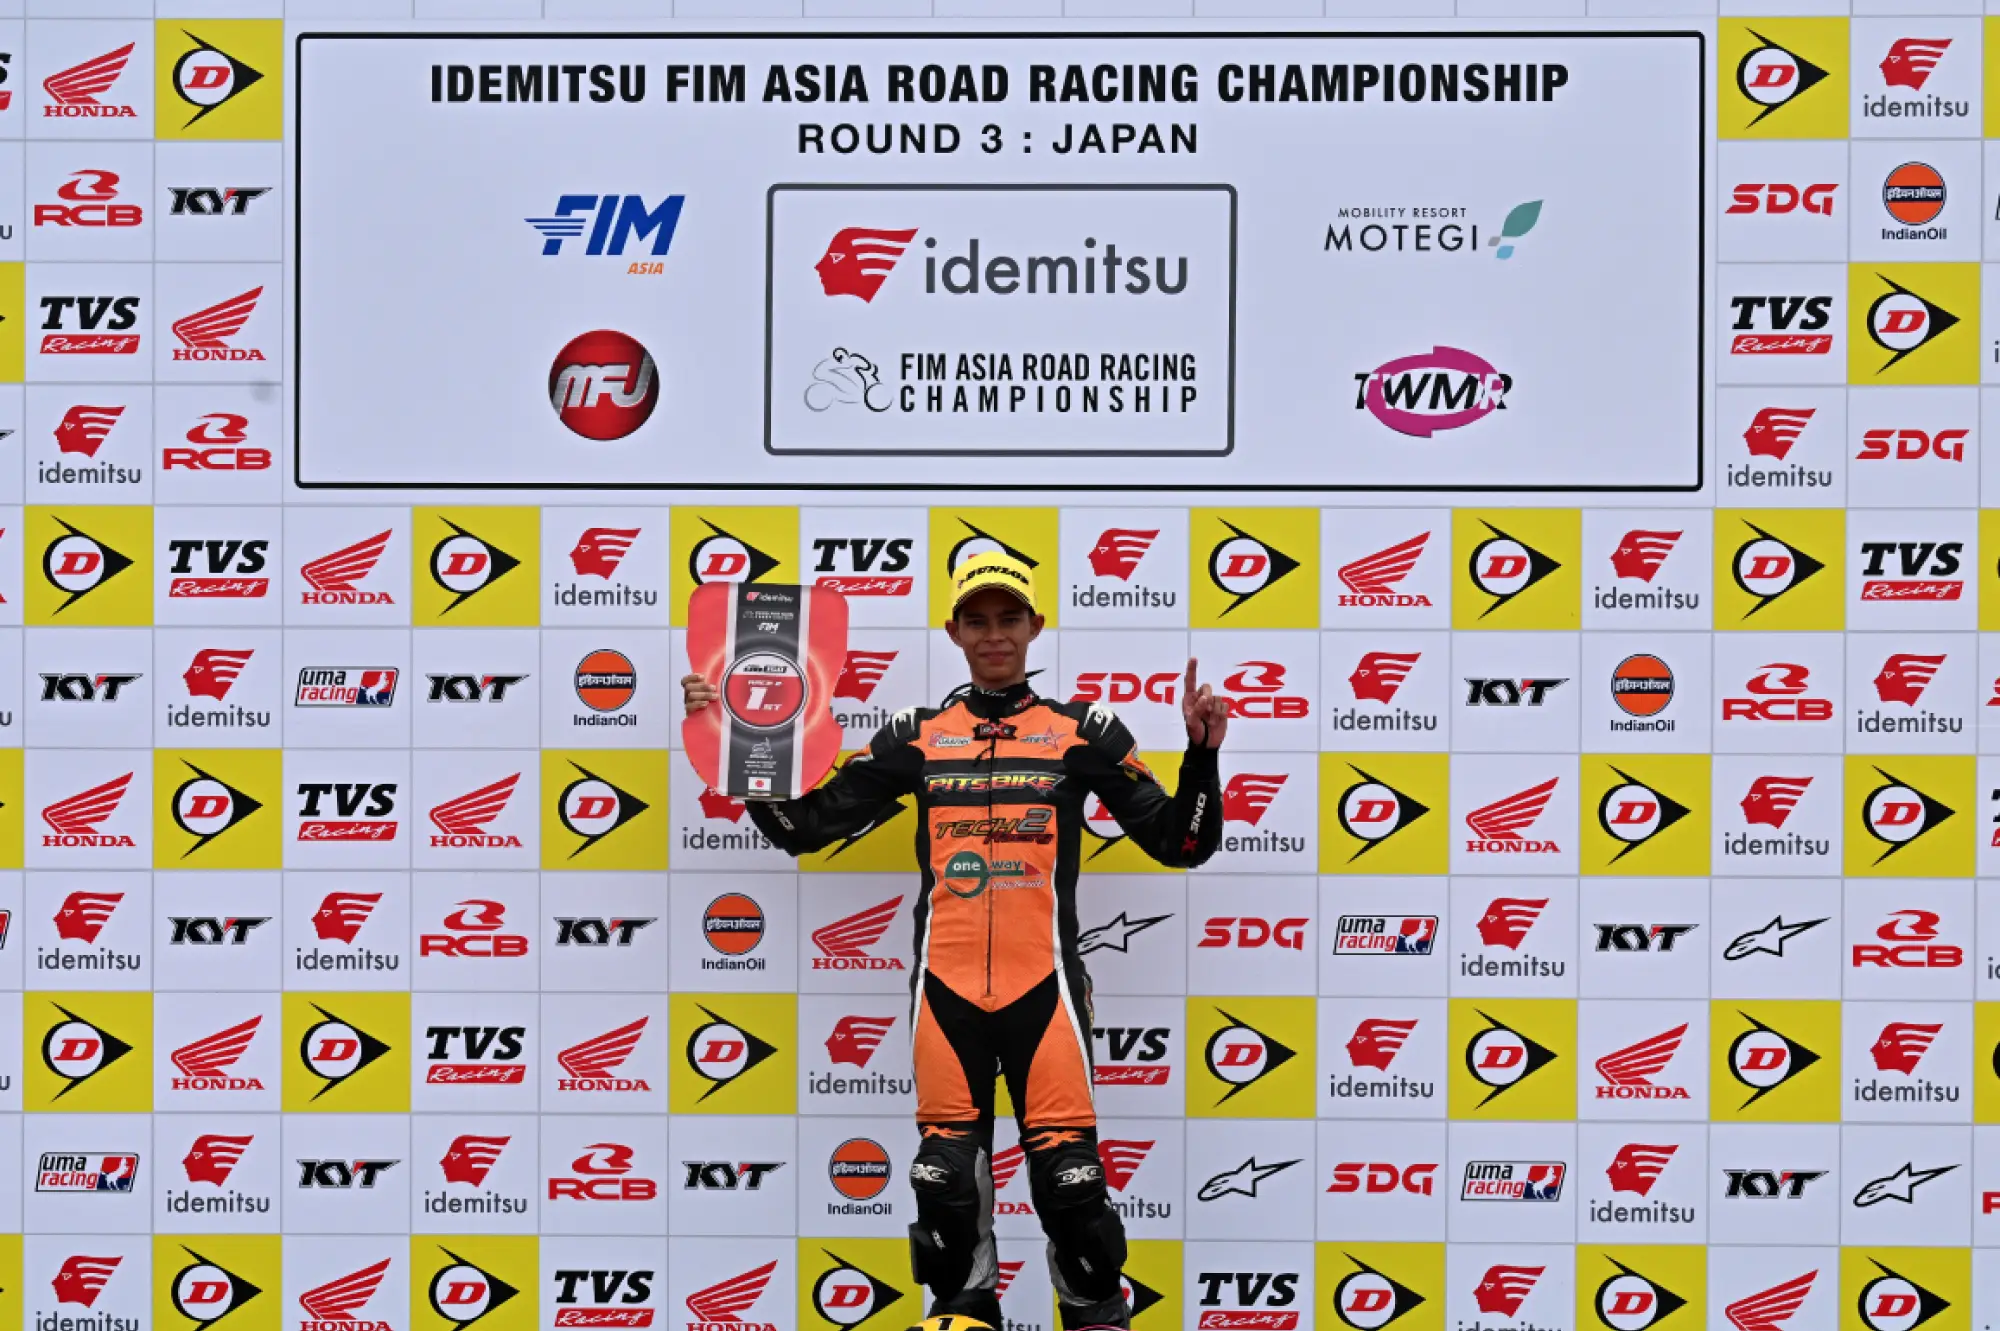 AKID CLIMB TO TOP IN RACE 2